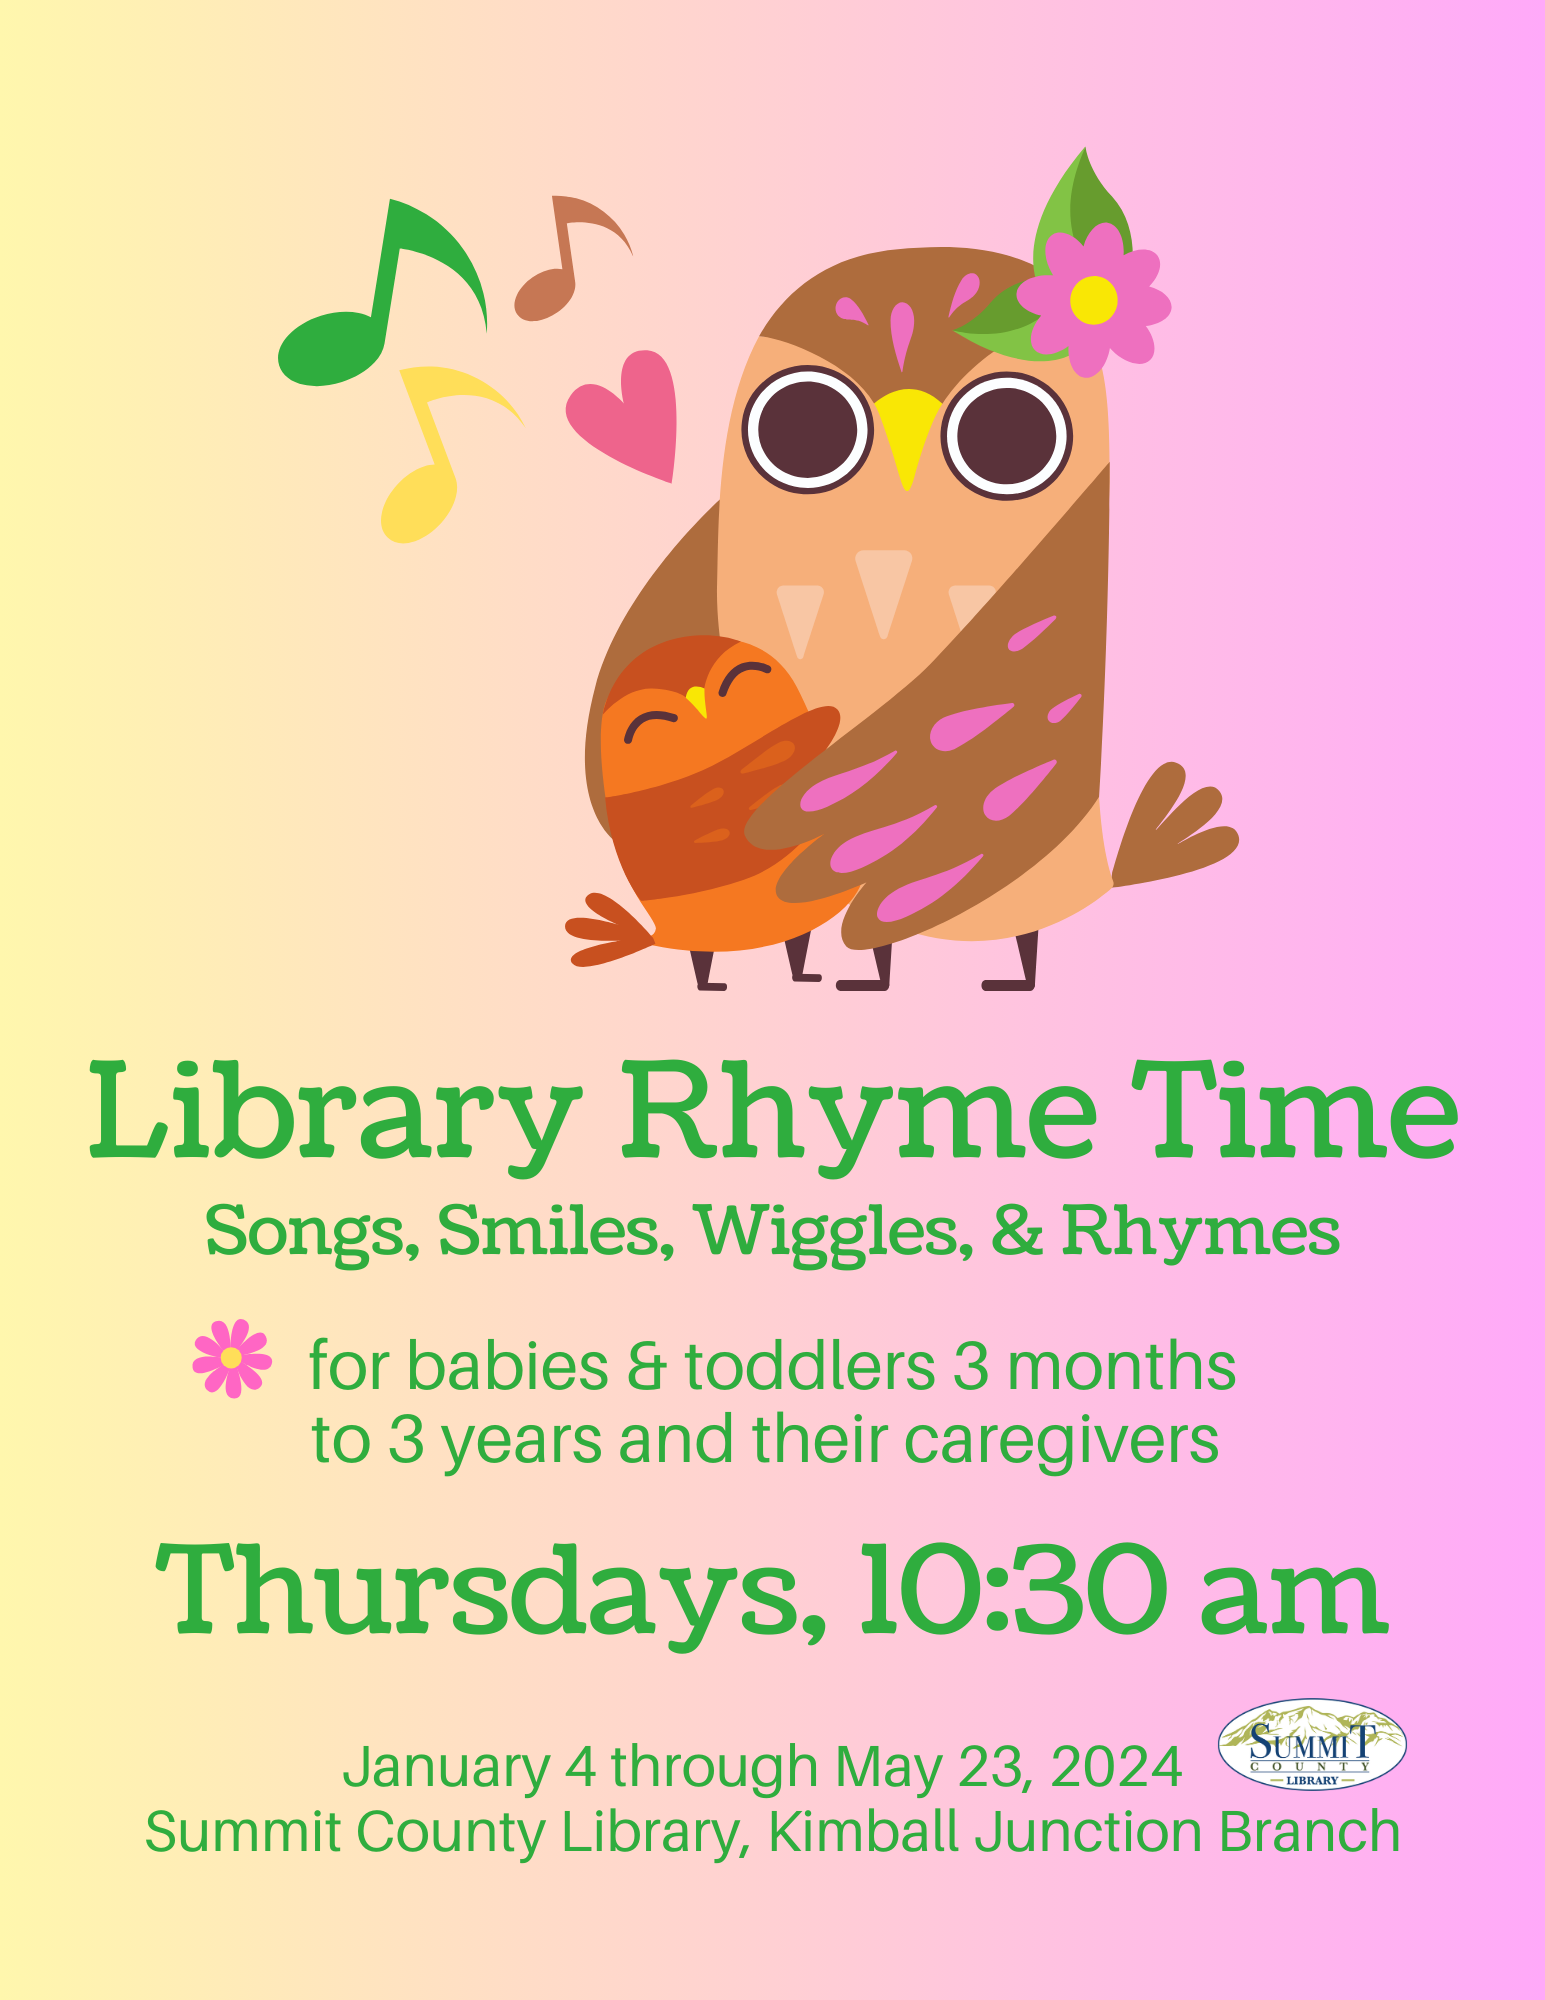 Library Rhyme Time at Kimball Junction